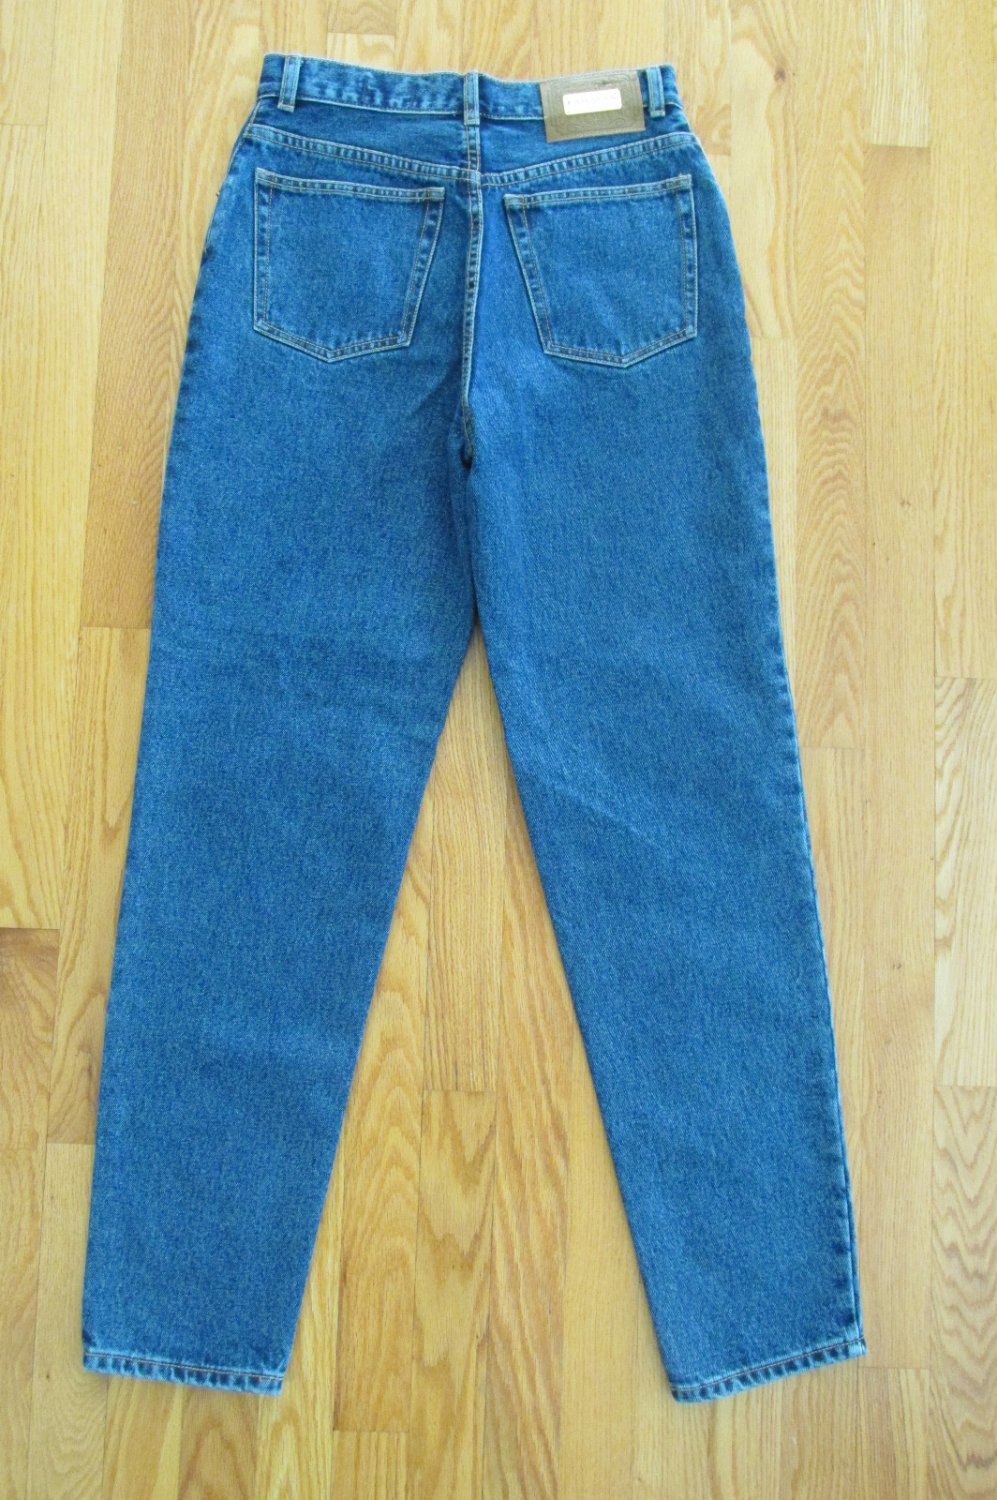 LAWMAN WOMEN'S JUNIOR'S SIZE 9 JEANS STONE WASHED TAPERED LEG MOM HIGH ...